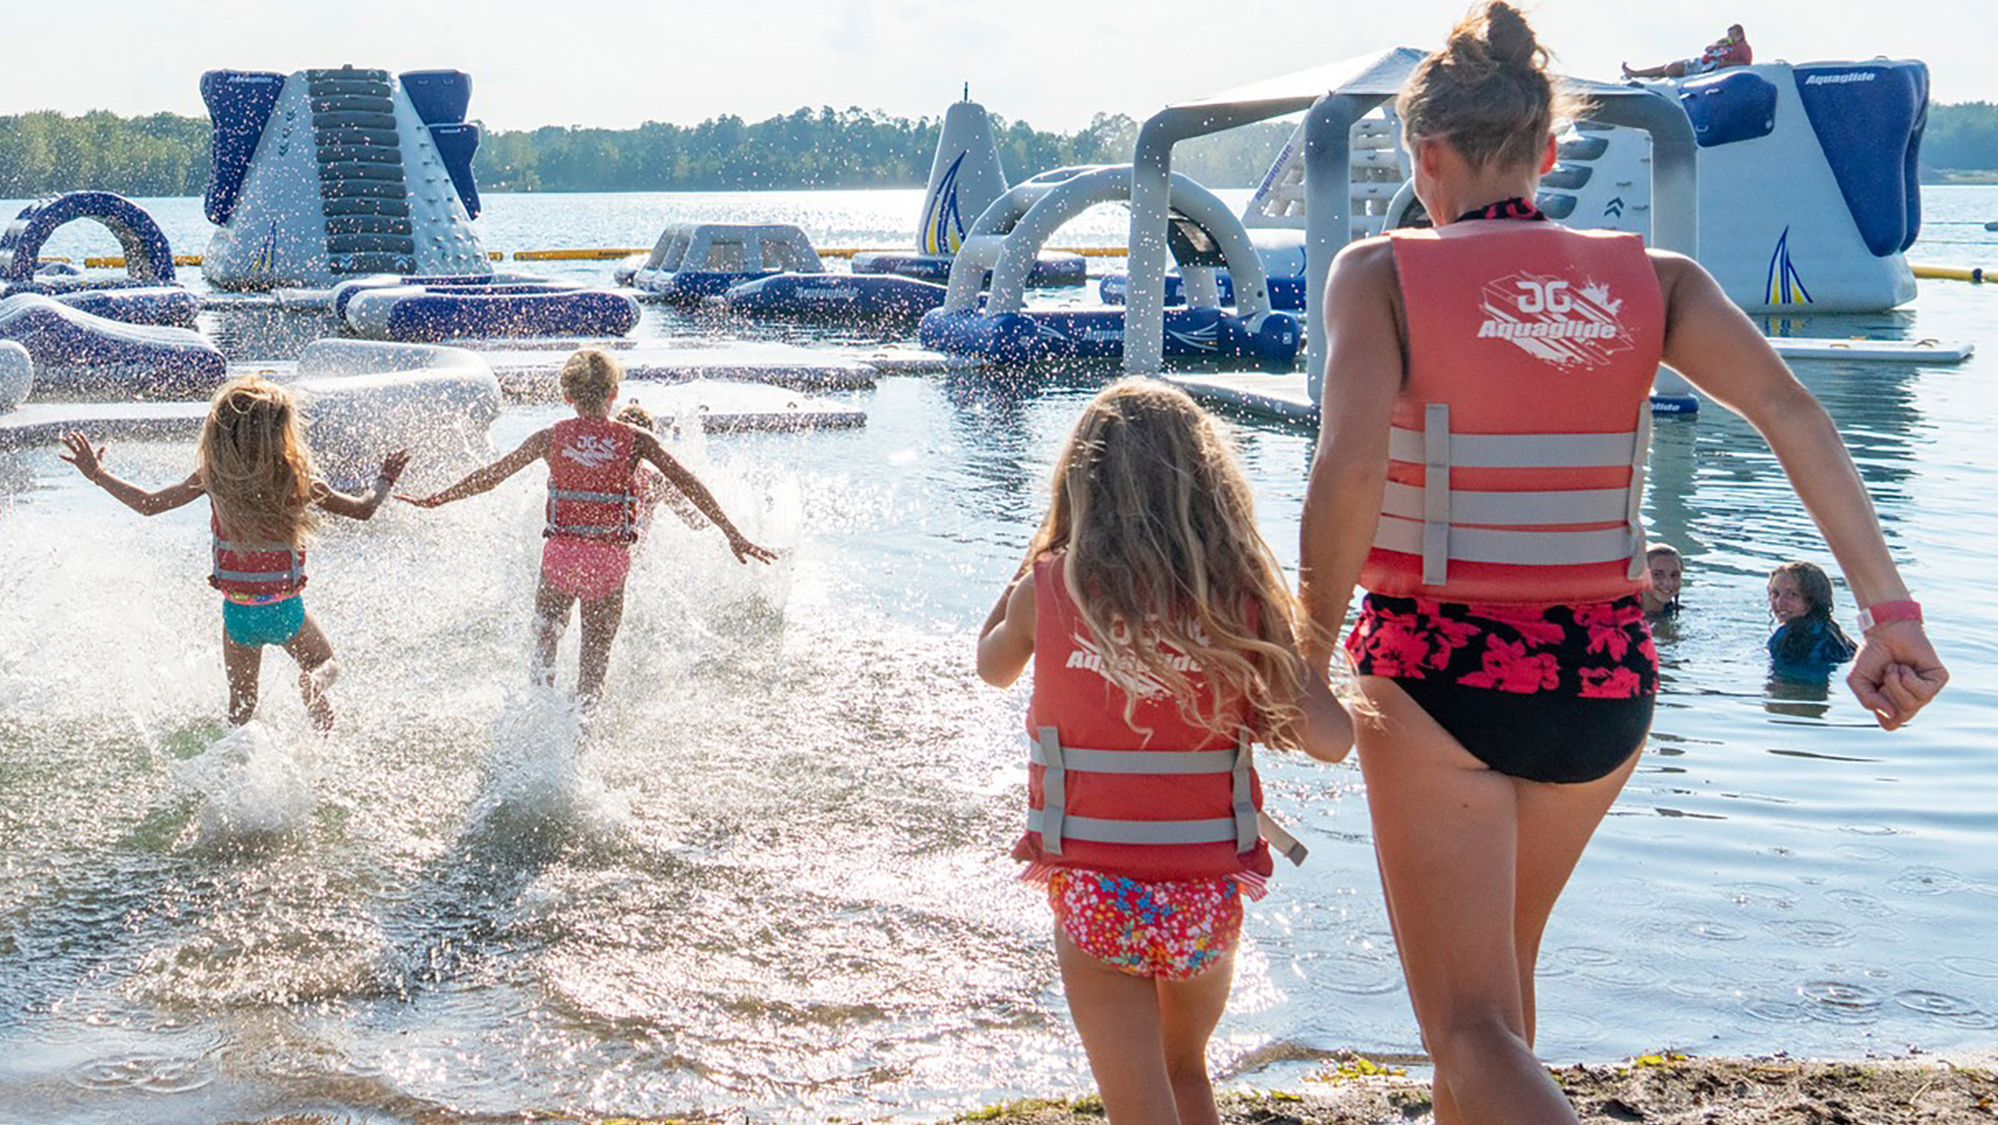 A woman and 3 kids wearing swim suits going into a lake towards an inflatable course.